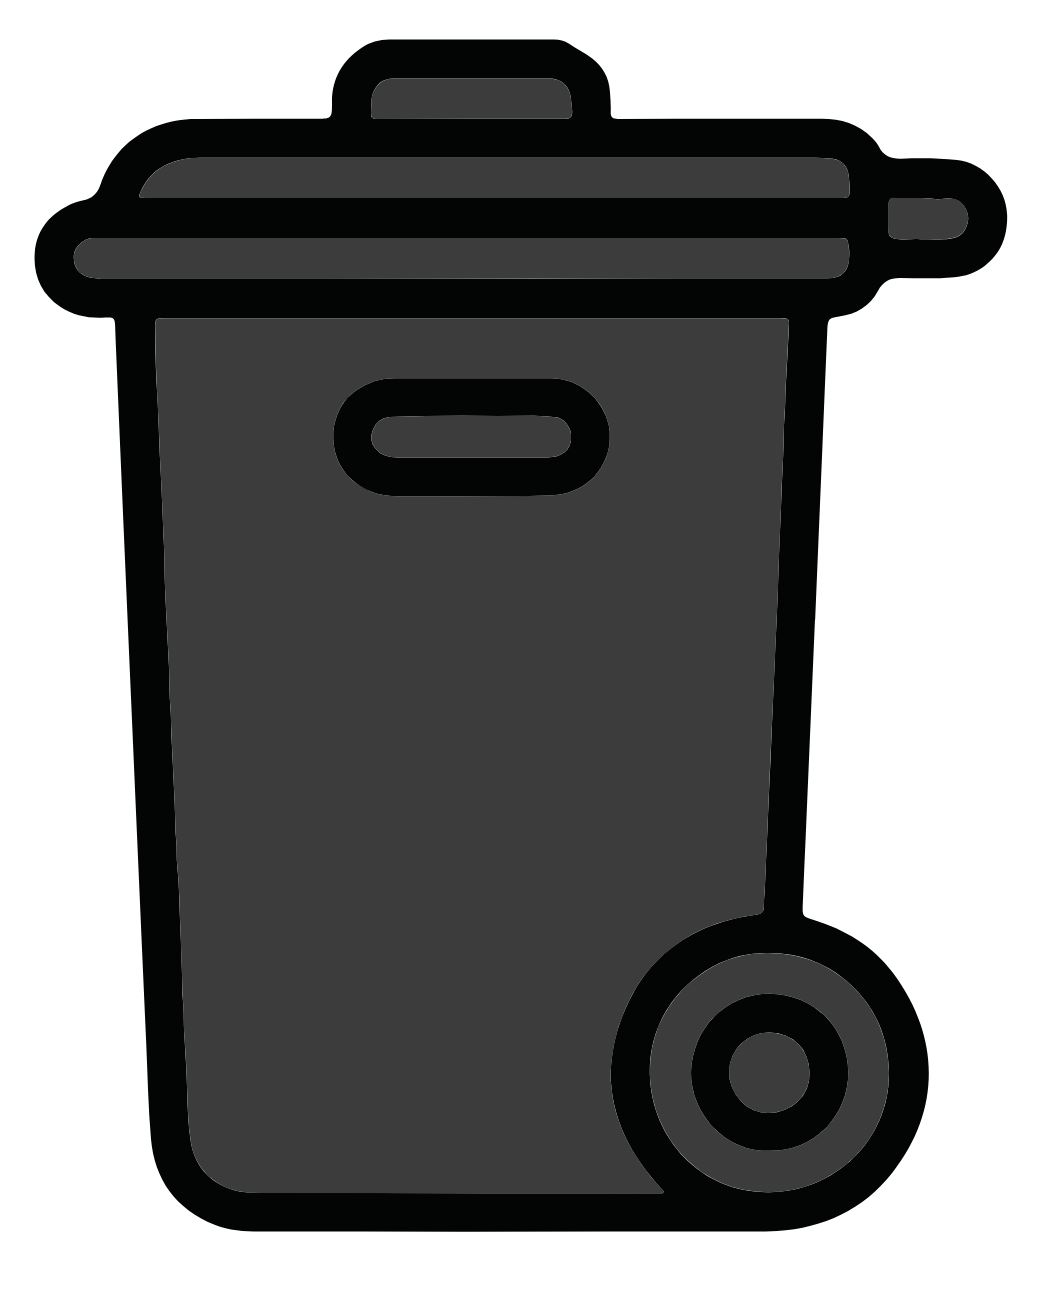 Image to represent non-recyclable waste collections